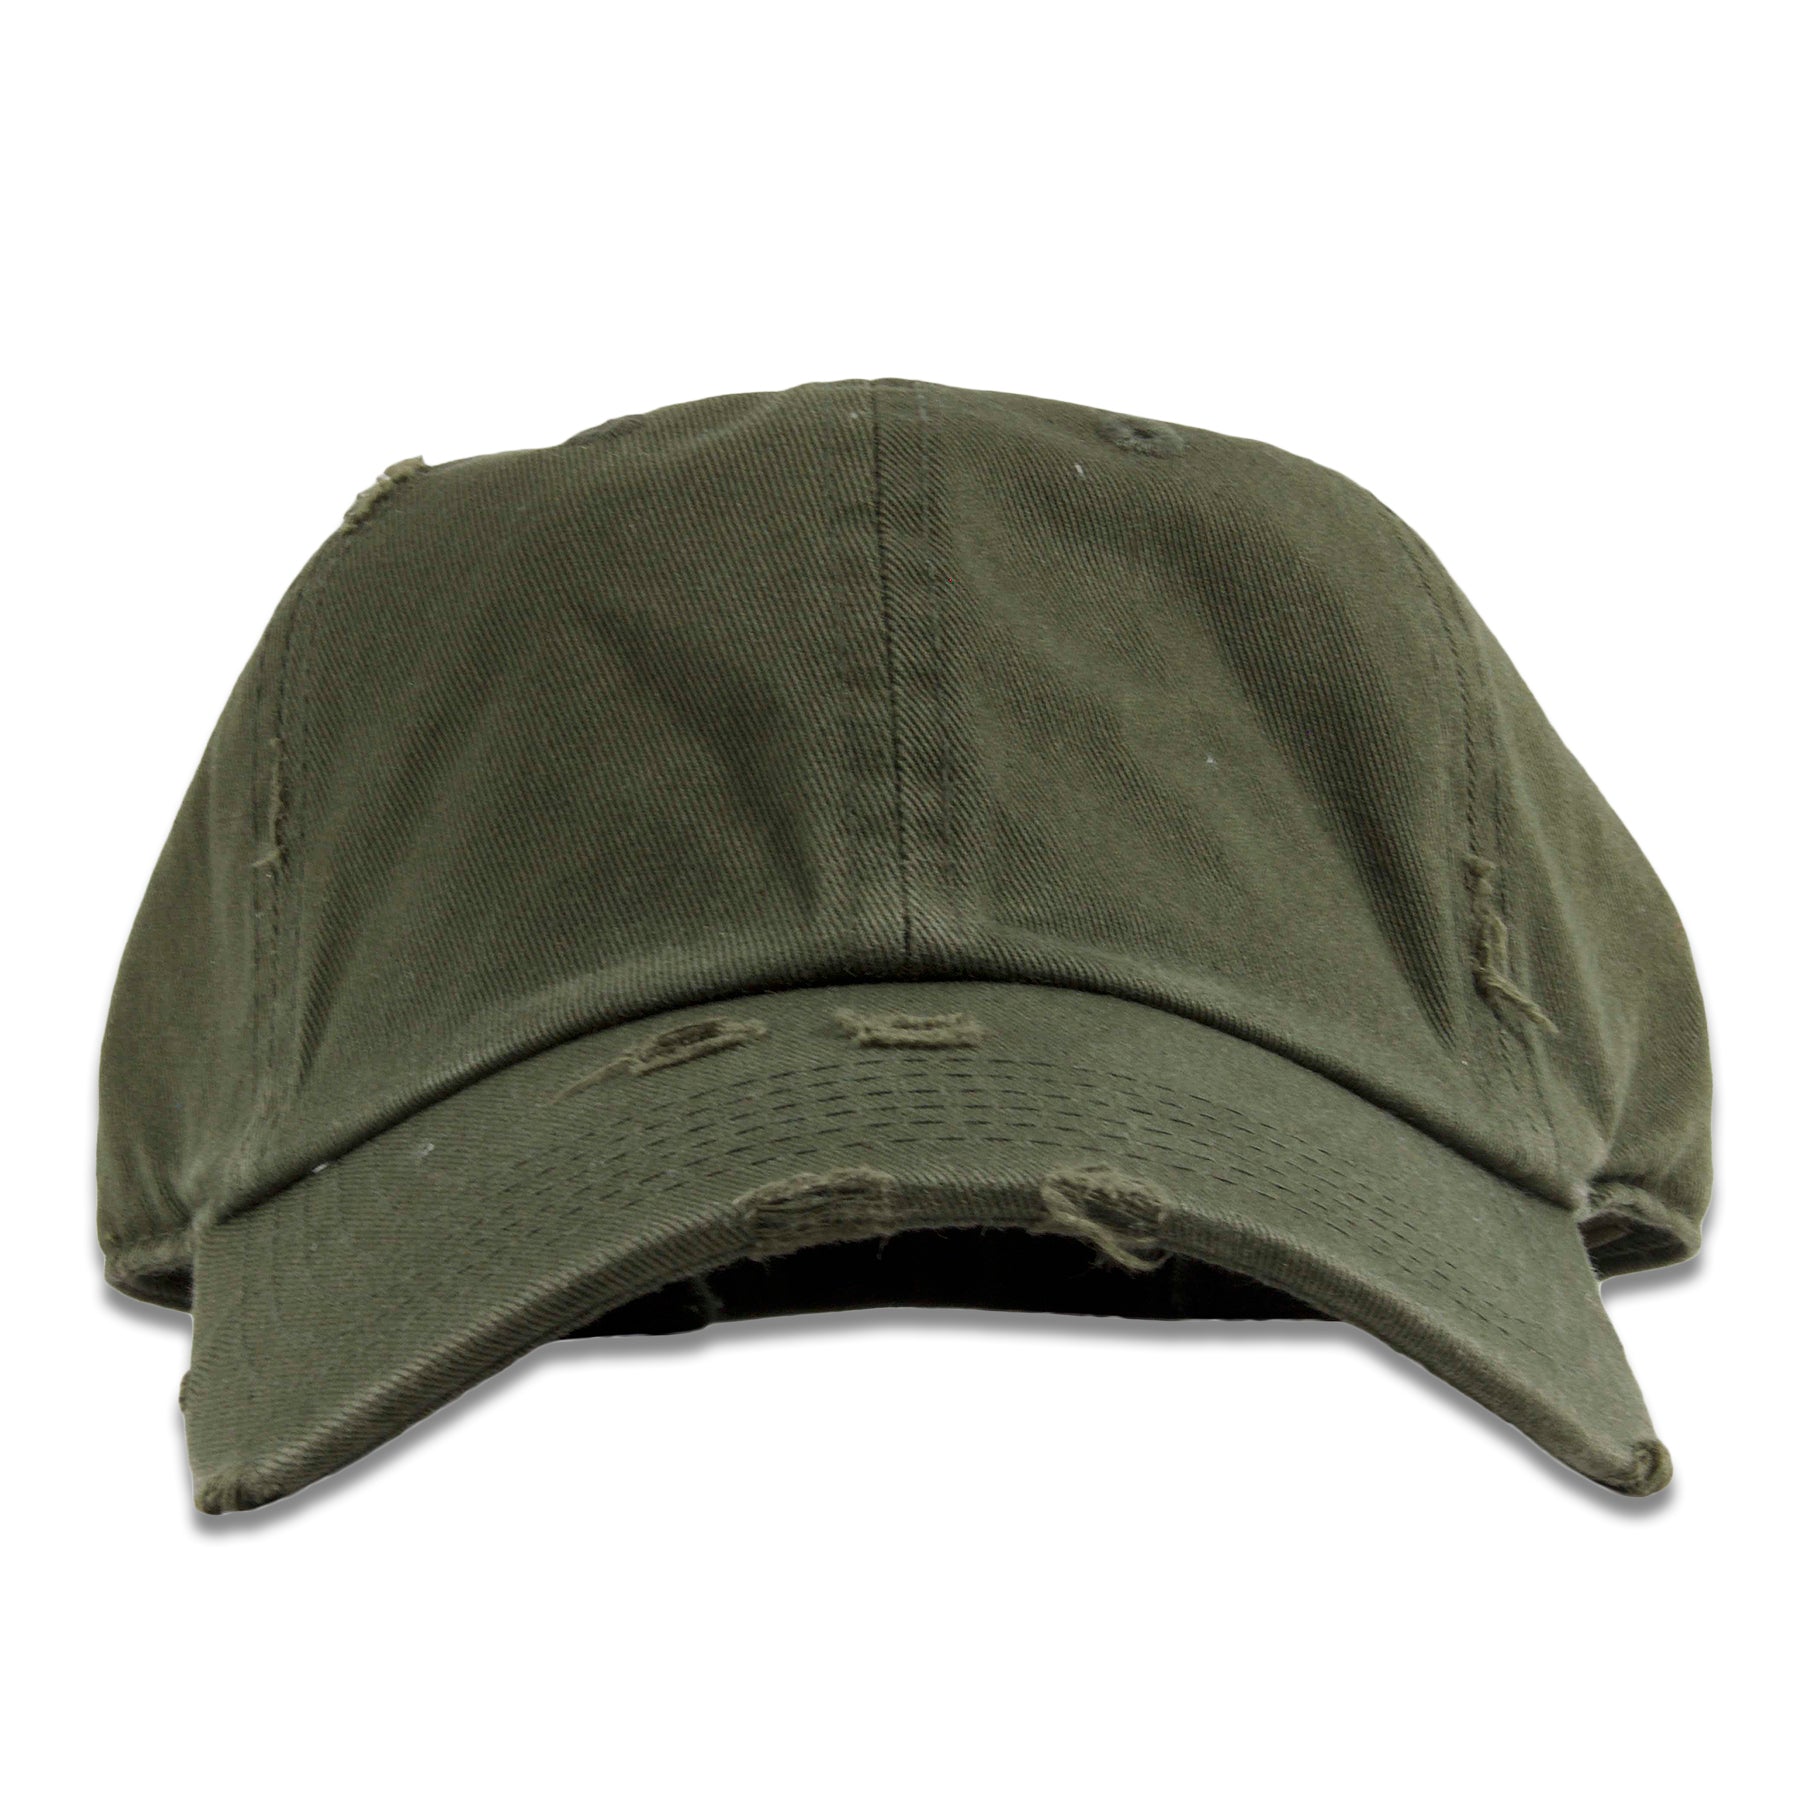 The olive blank kid's distressed dad hat has an unstructured soft crown and a bent brim